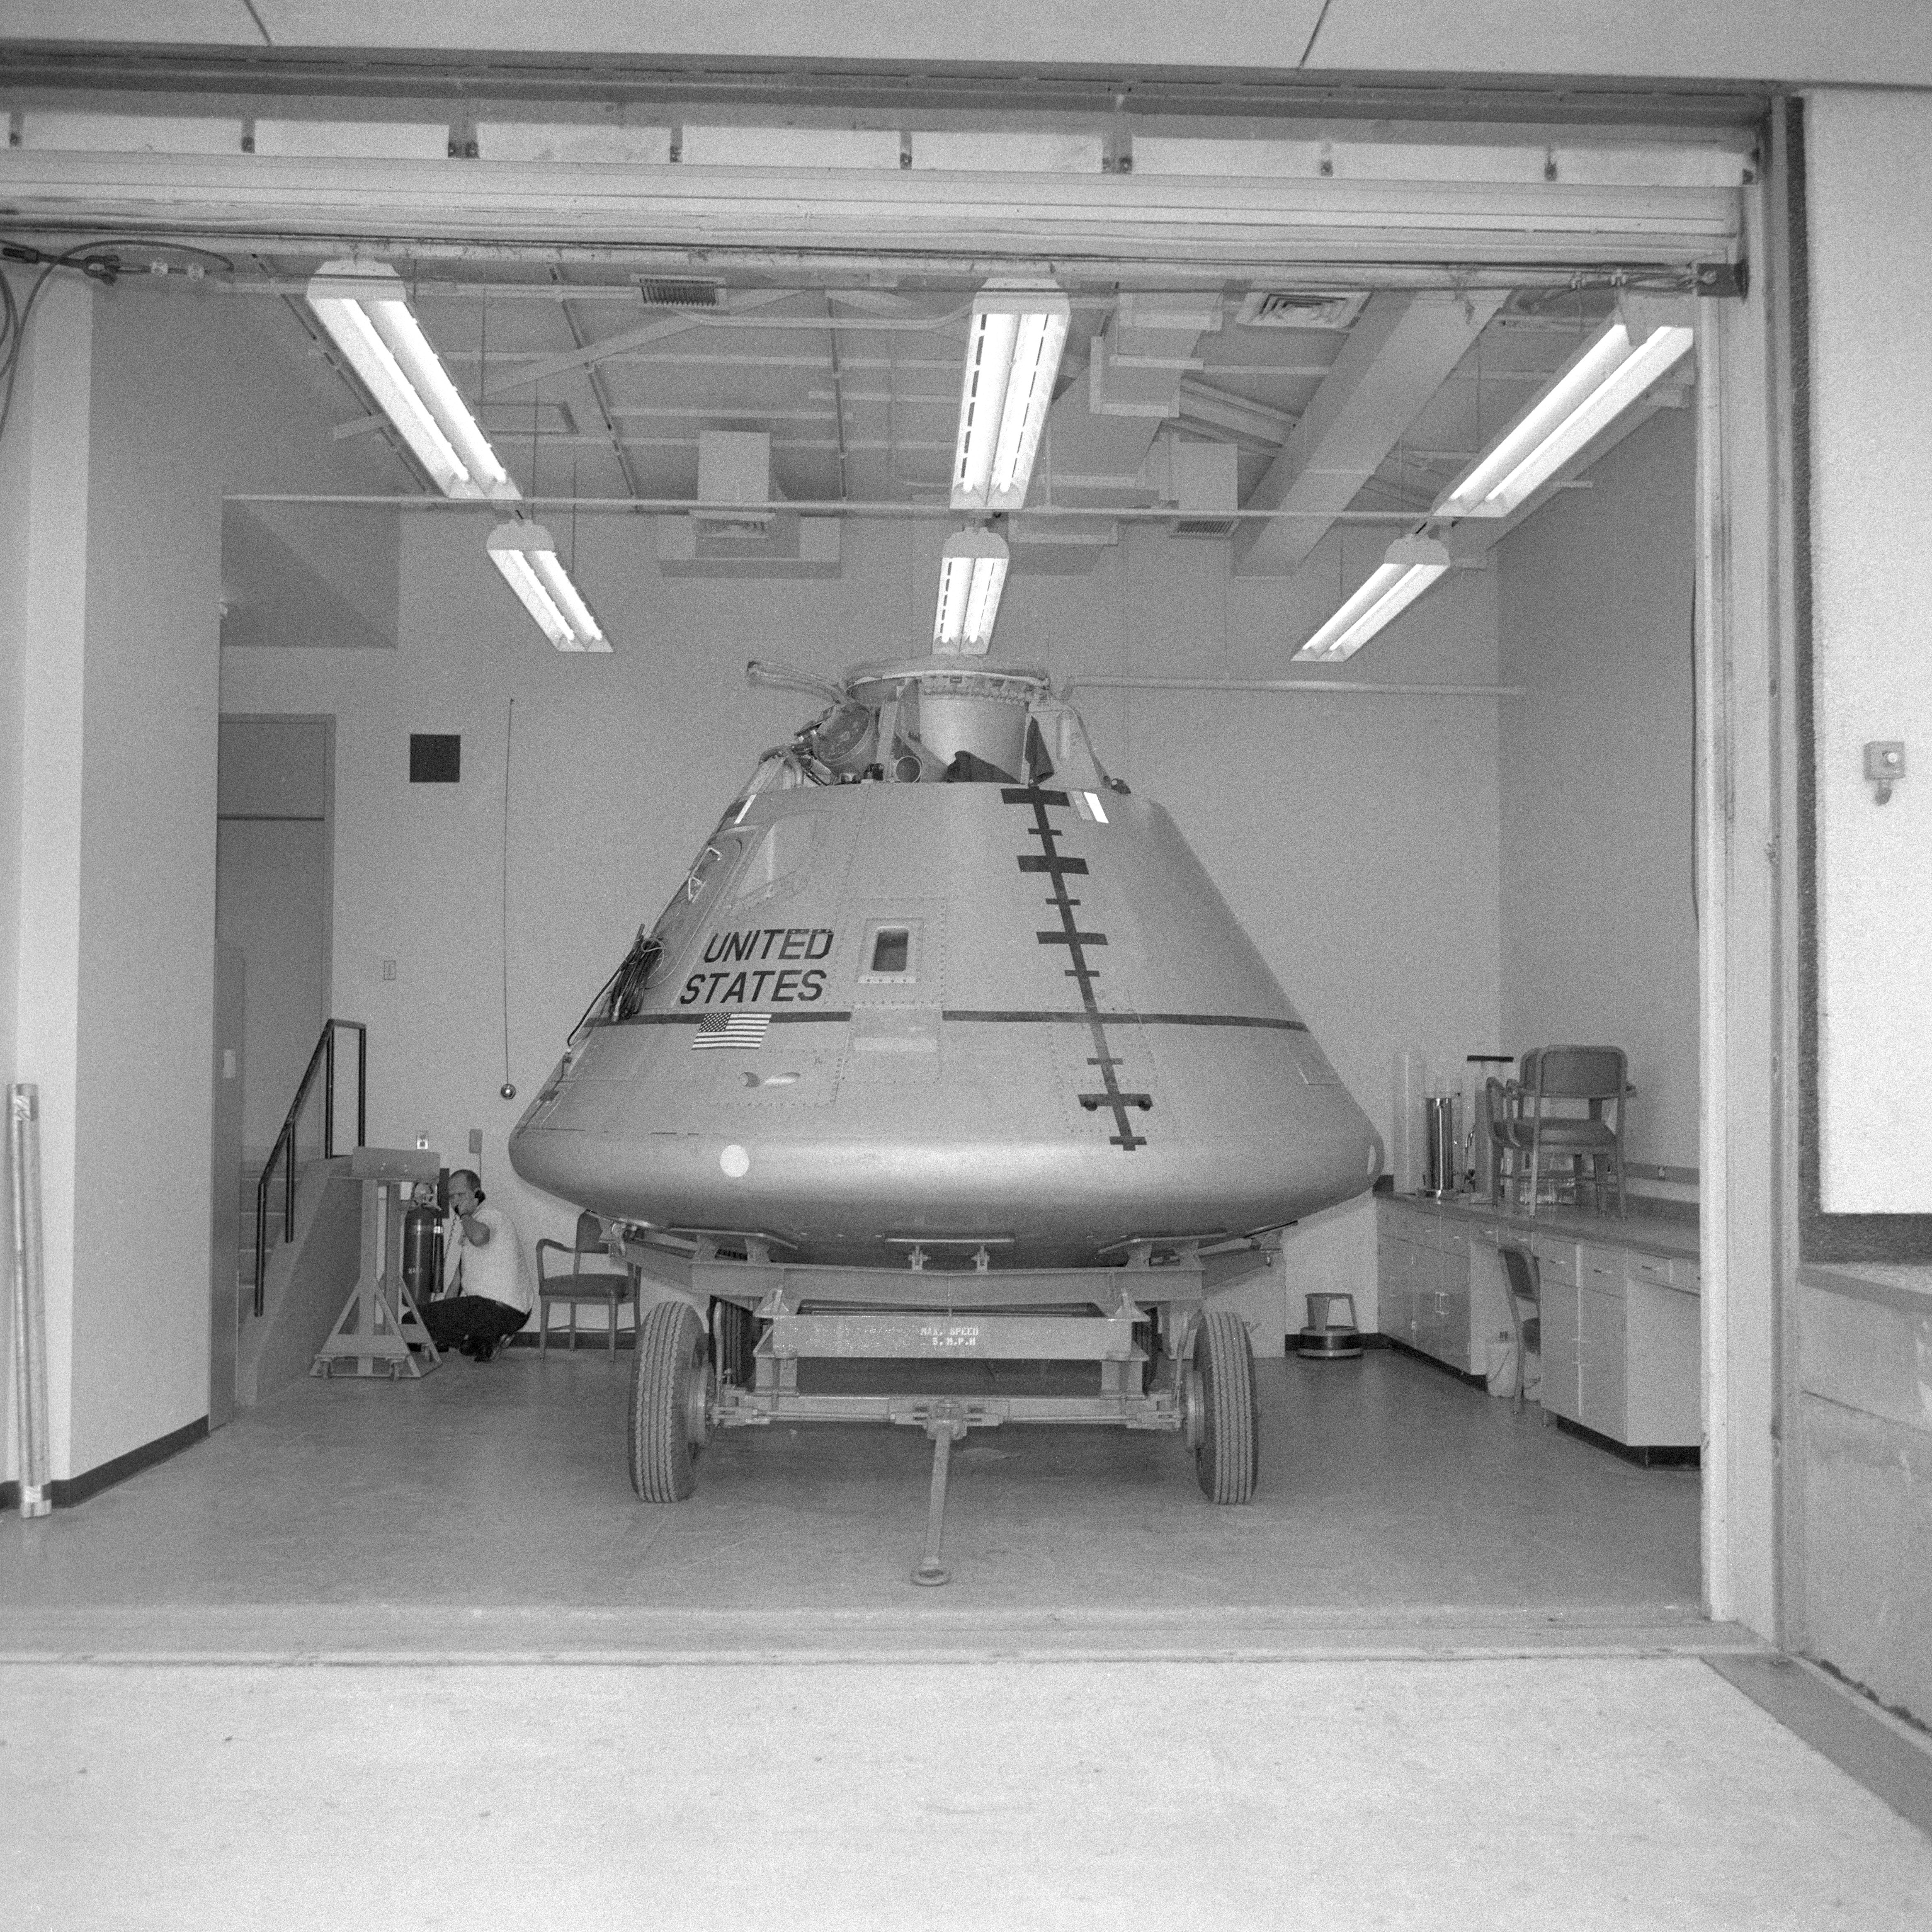 A mockup Command Module in the spacecraft storage area, part of the Crew Reception Area, in the LRL